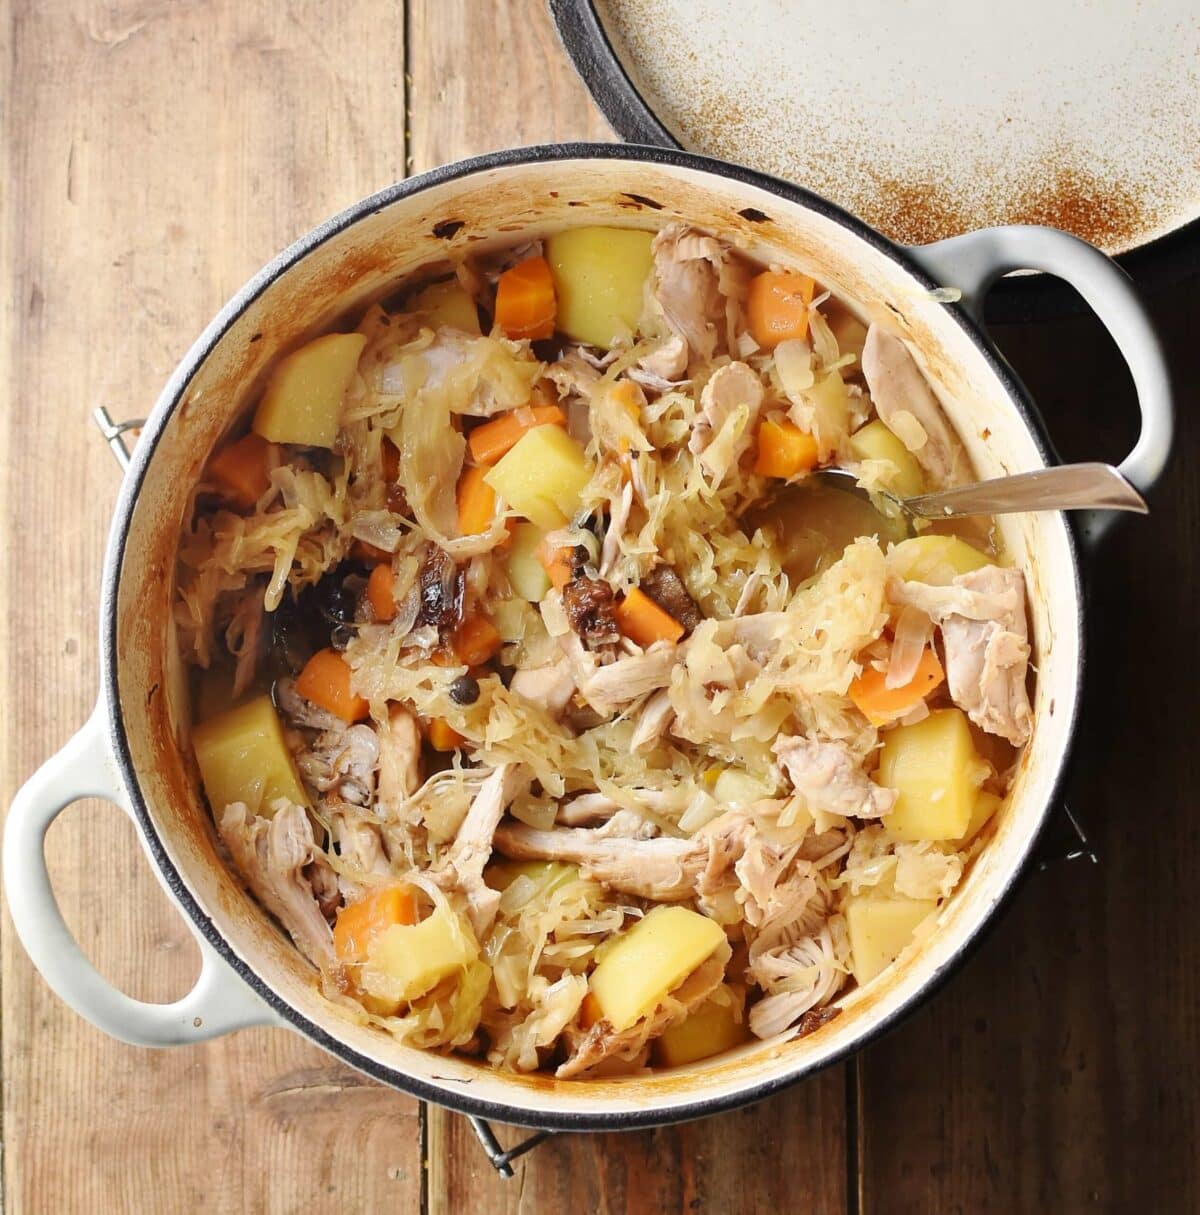 Potatoes, carrots, chicken pieces and sauerkraut in large white pot with spoon and lid in top right.